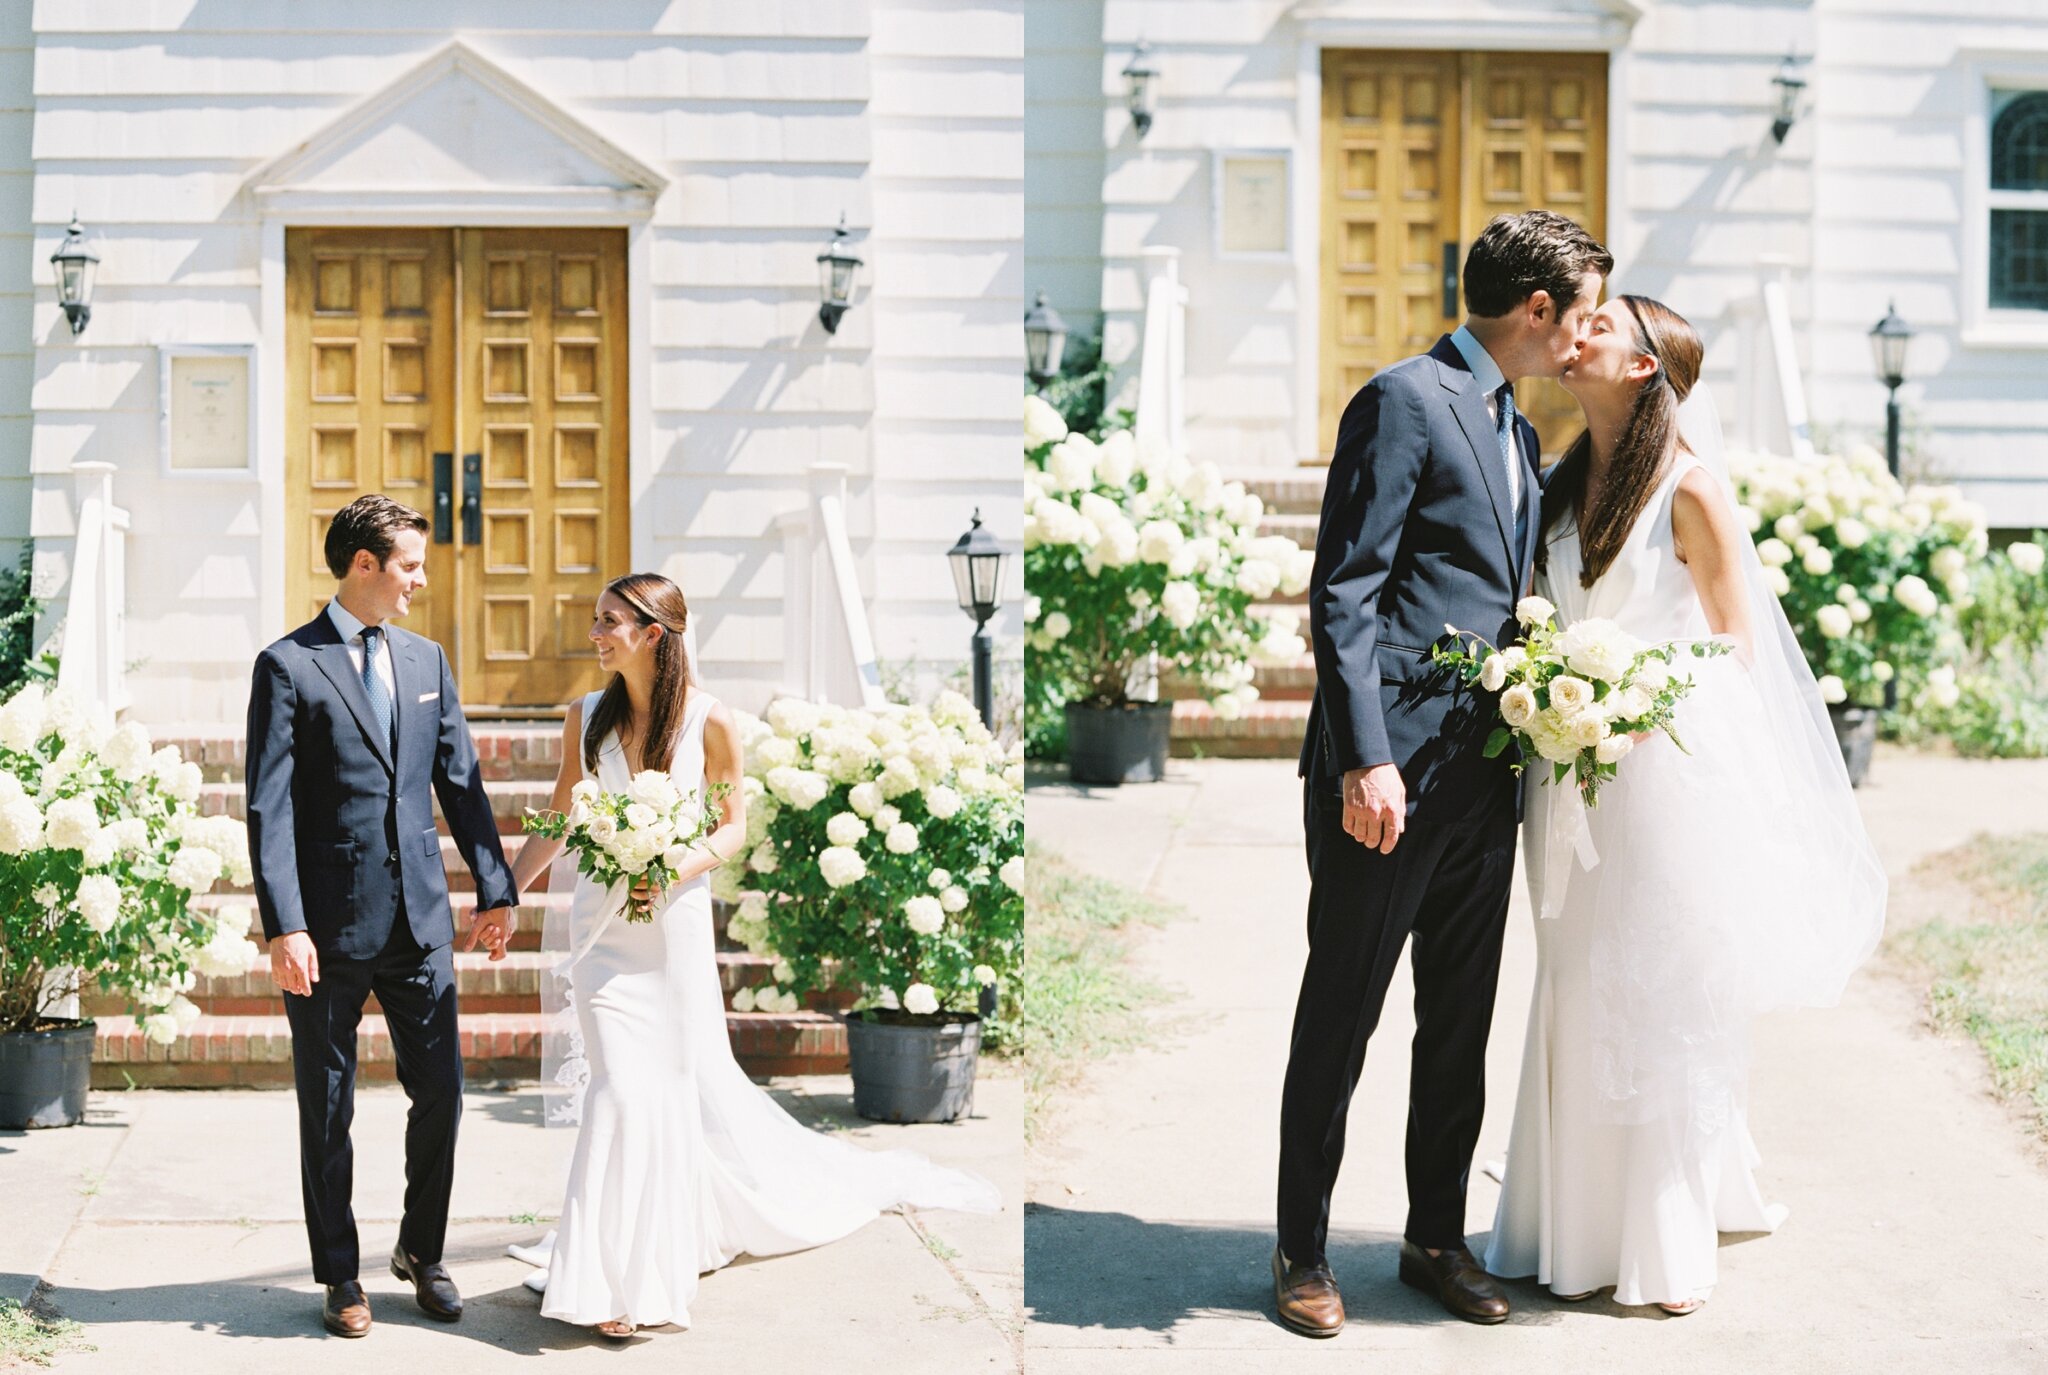 Wedding Photos at St. Peter the Apostle Mission Church in Amagansett, NY